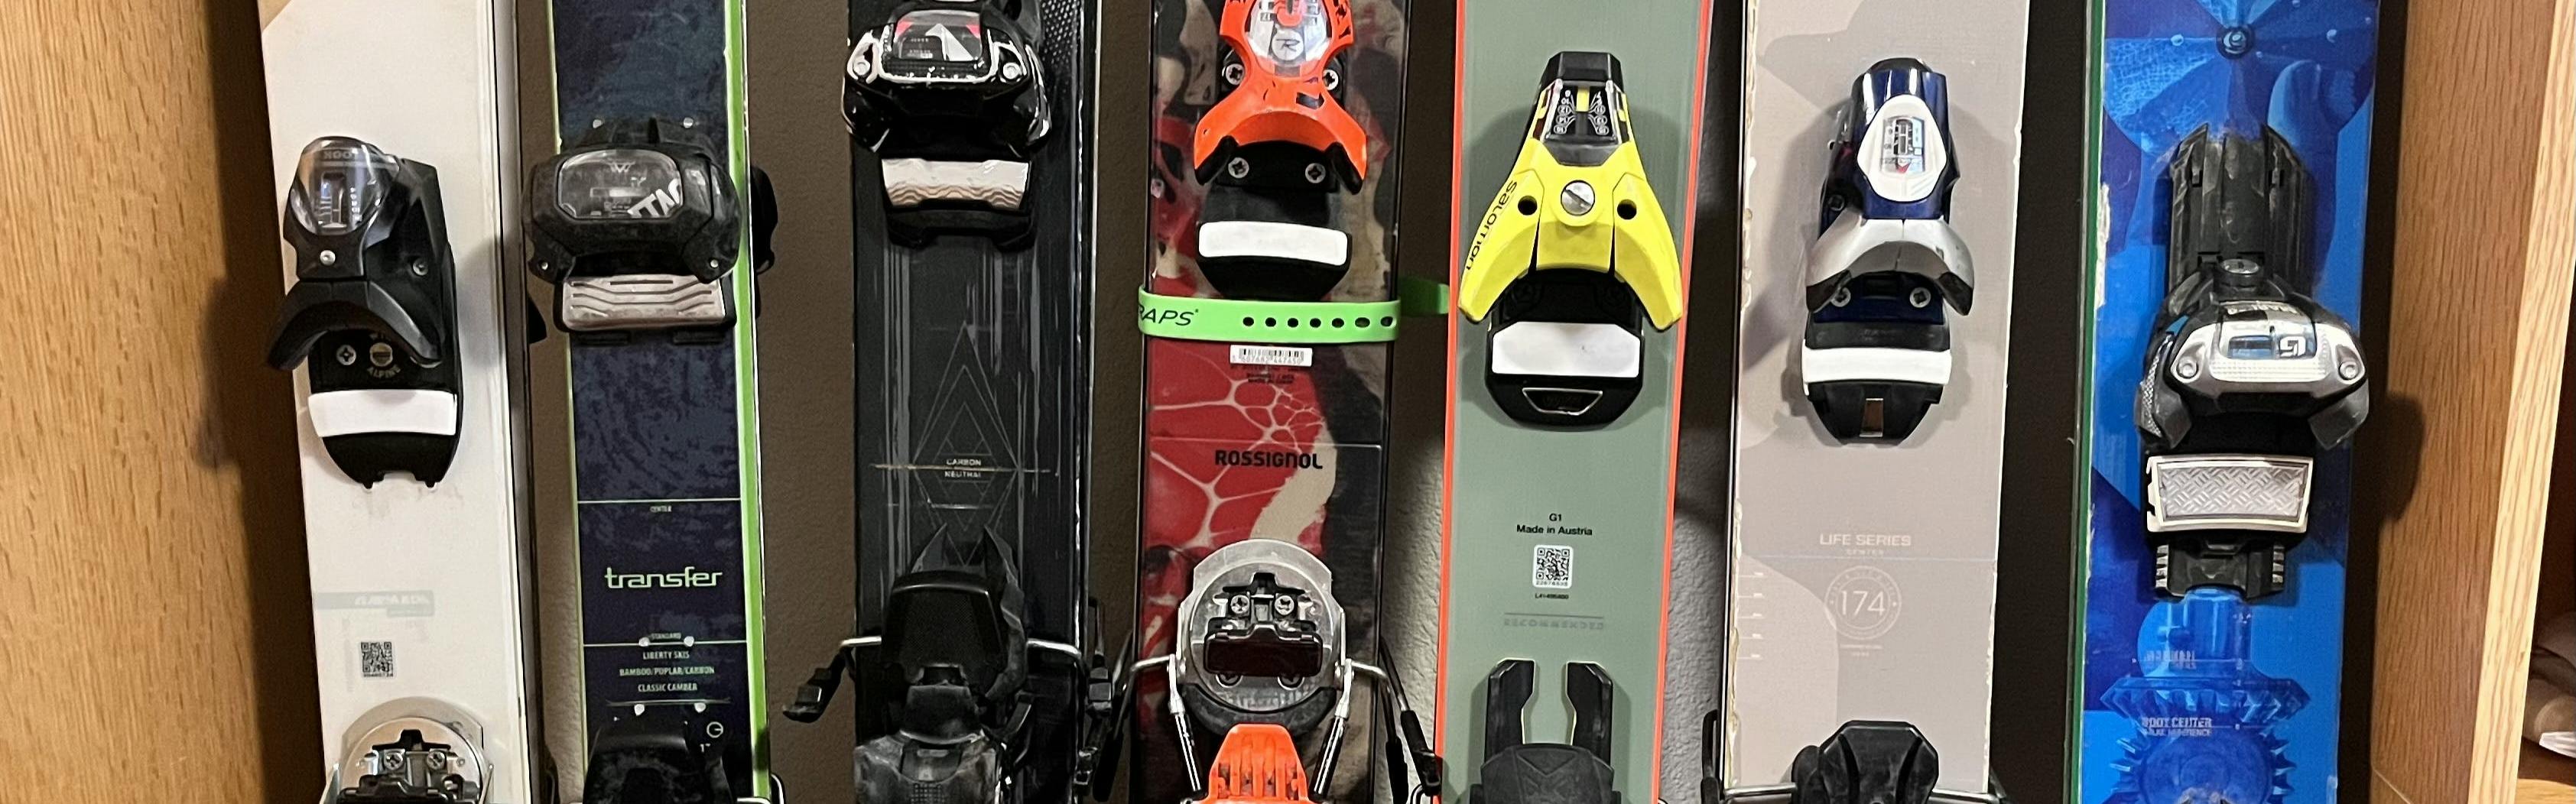 How to Choose Between the 4 Best Bindings from Different Ski Brands